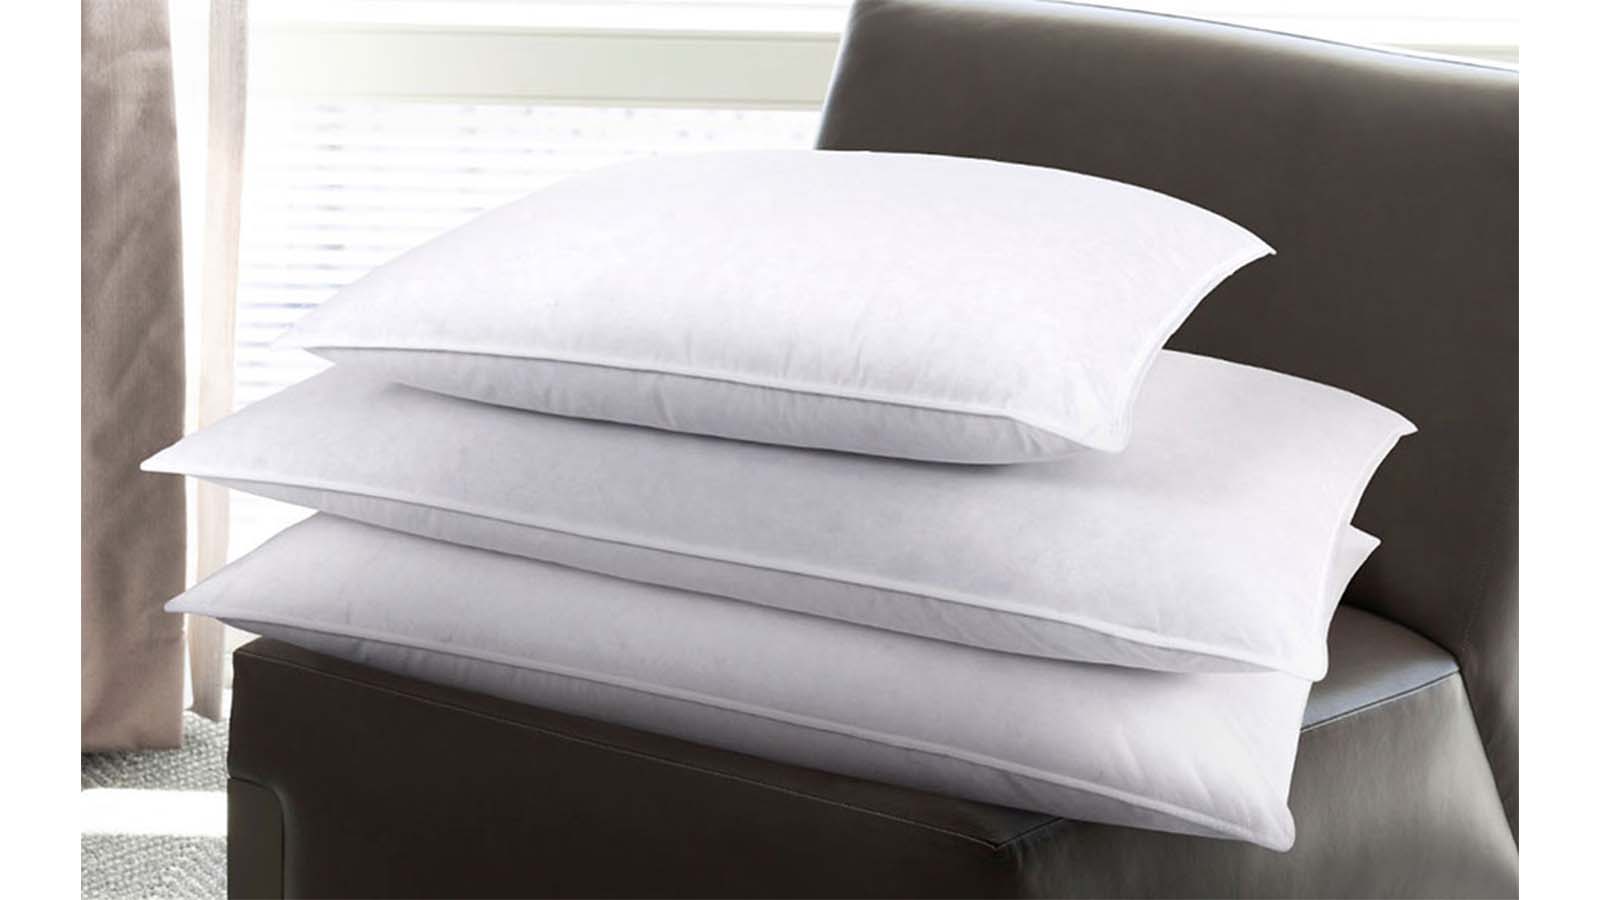 Best Hotel Pillows 2023 - Forbes Vetted